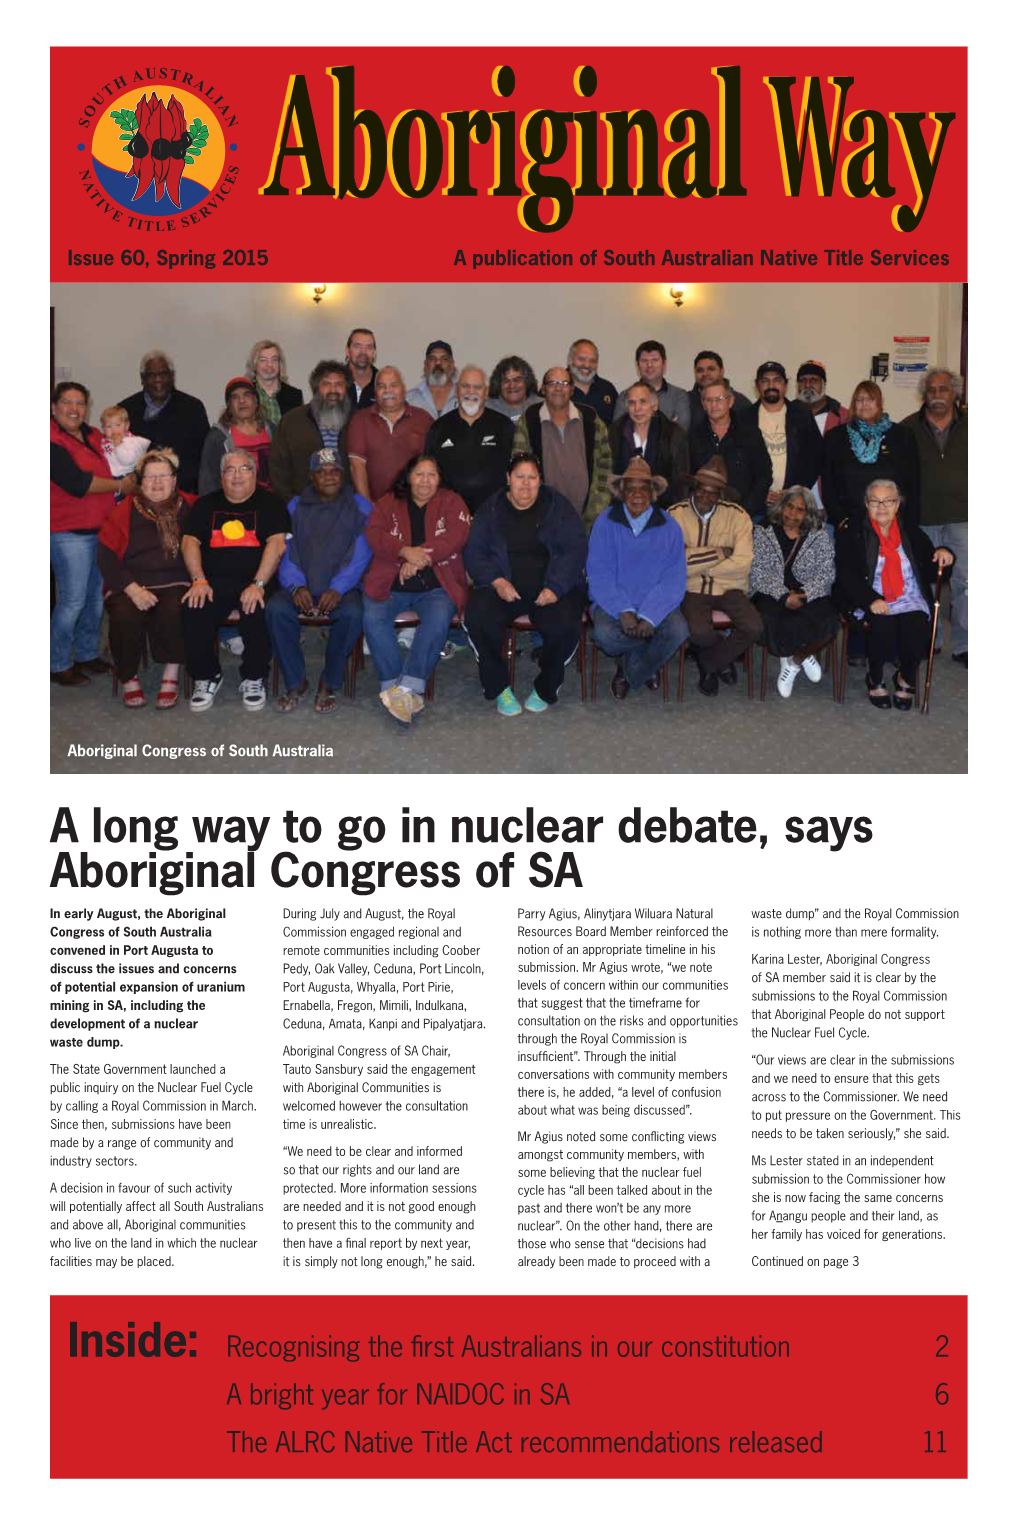 A Long Way to Go in Nuclear Debate, Says Aboriginal Congress of SA